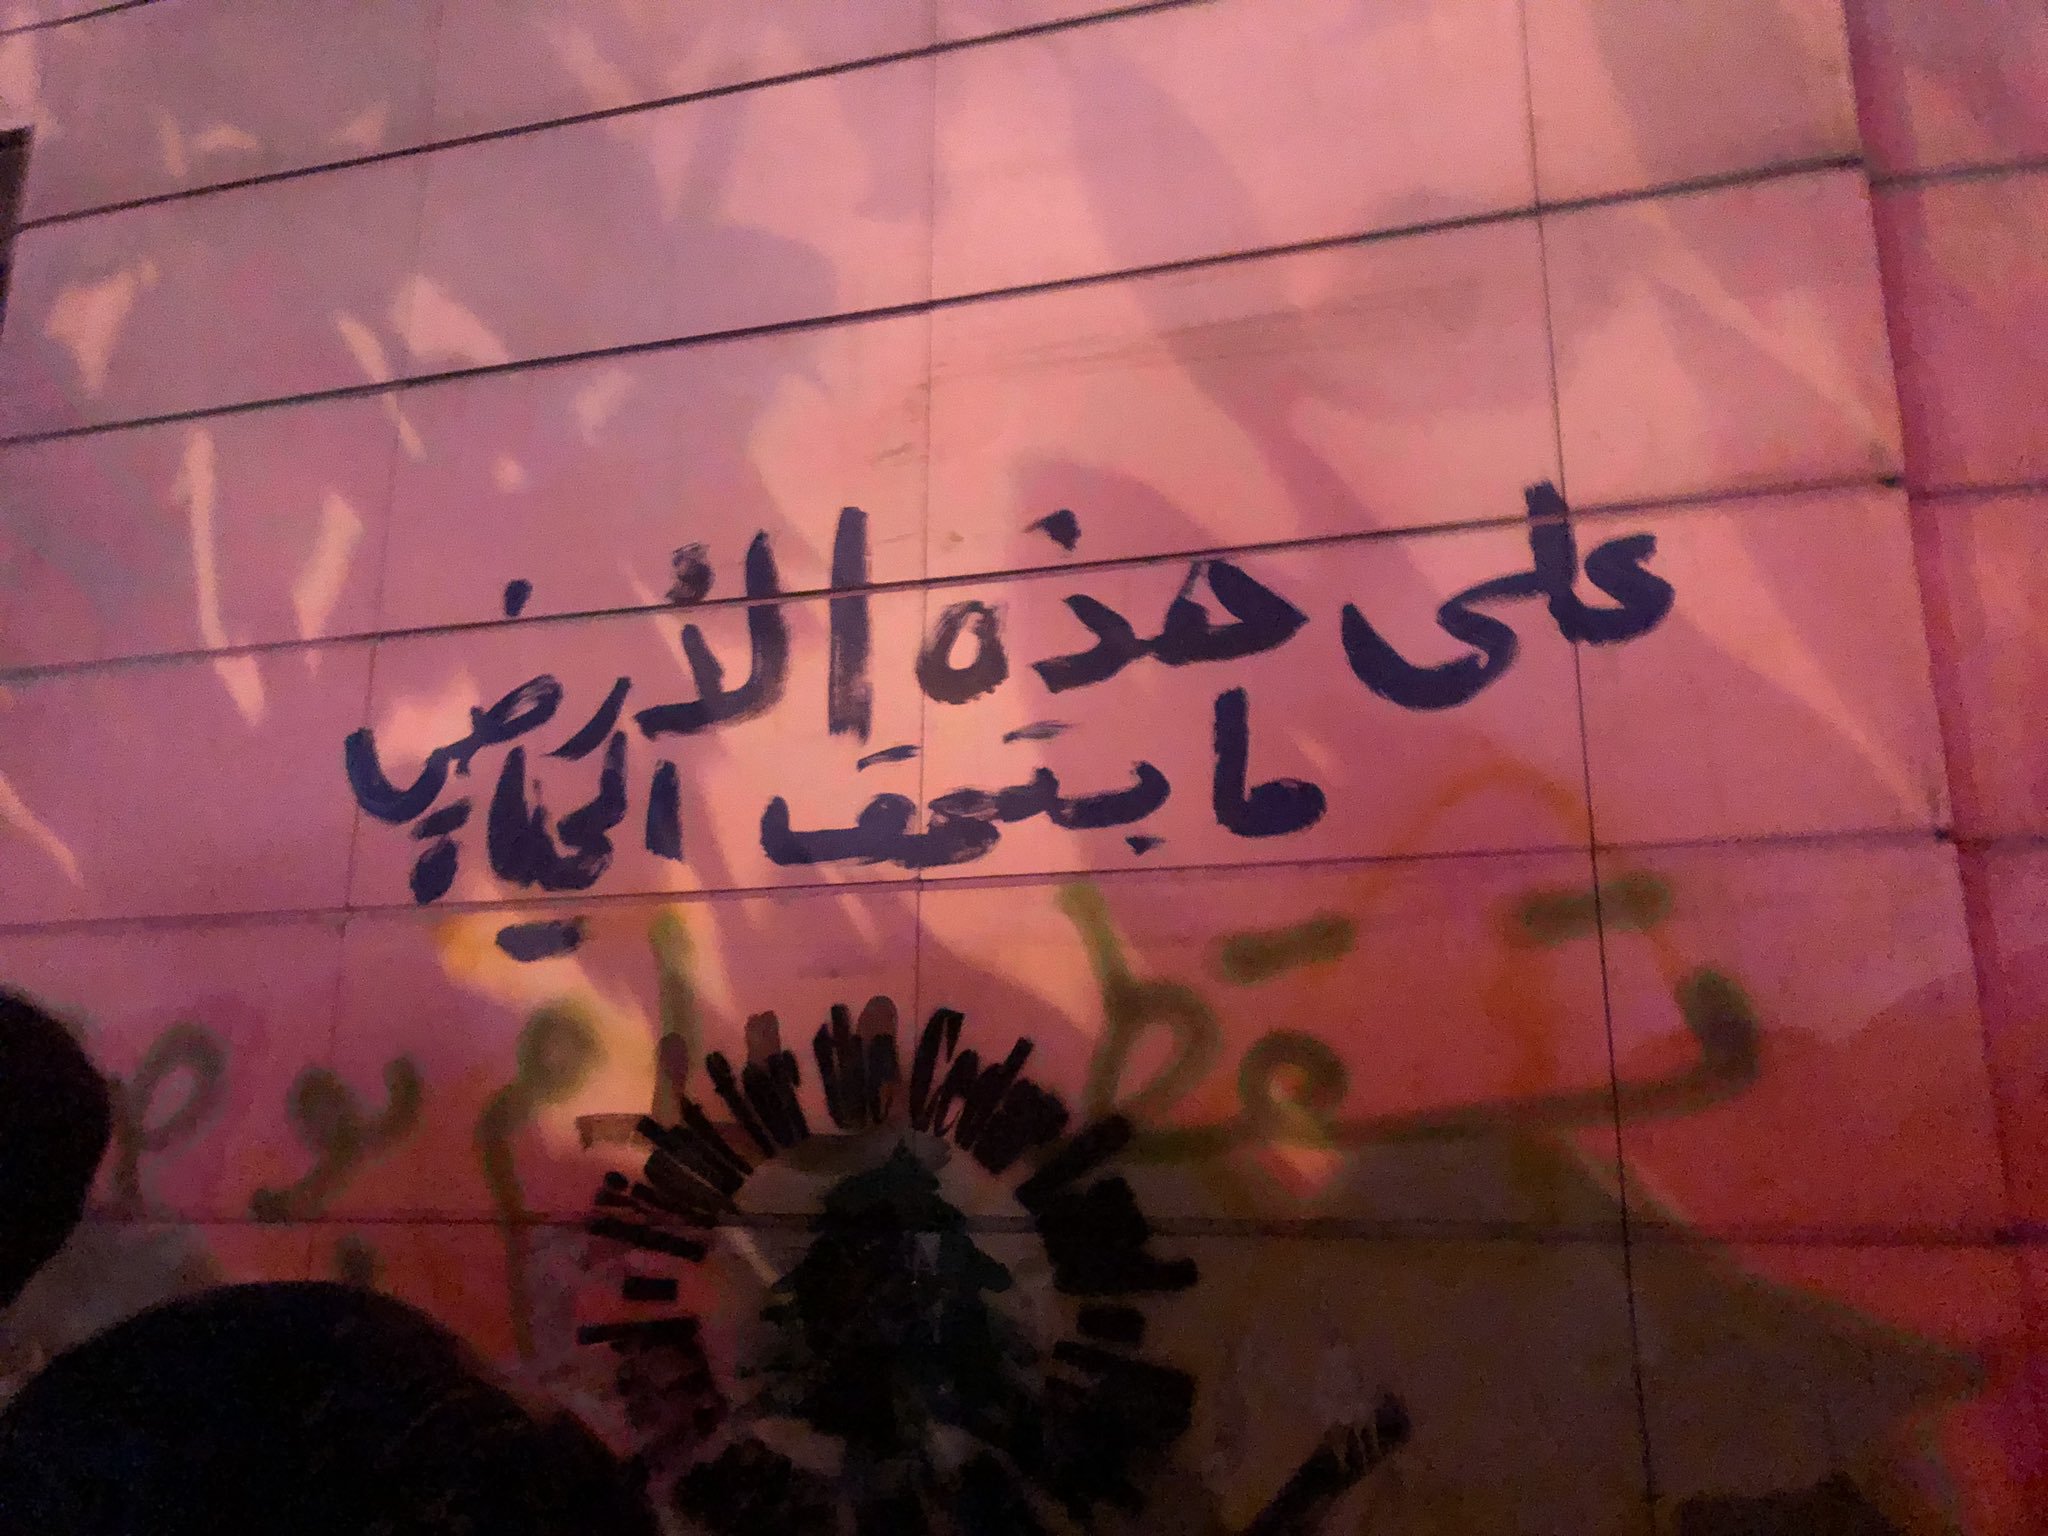 Image of Graffiti in Beirut reading We Have On This Earth What Makes Life Worth Living